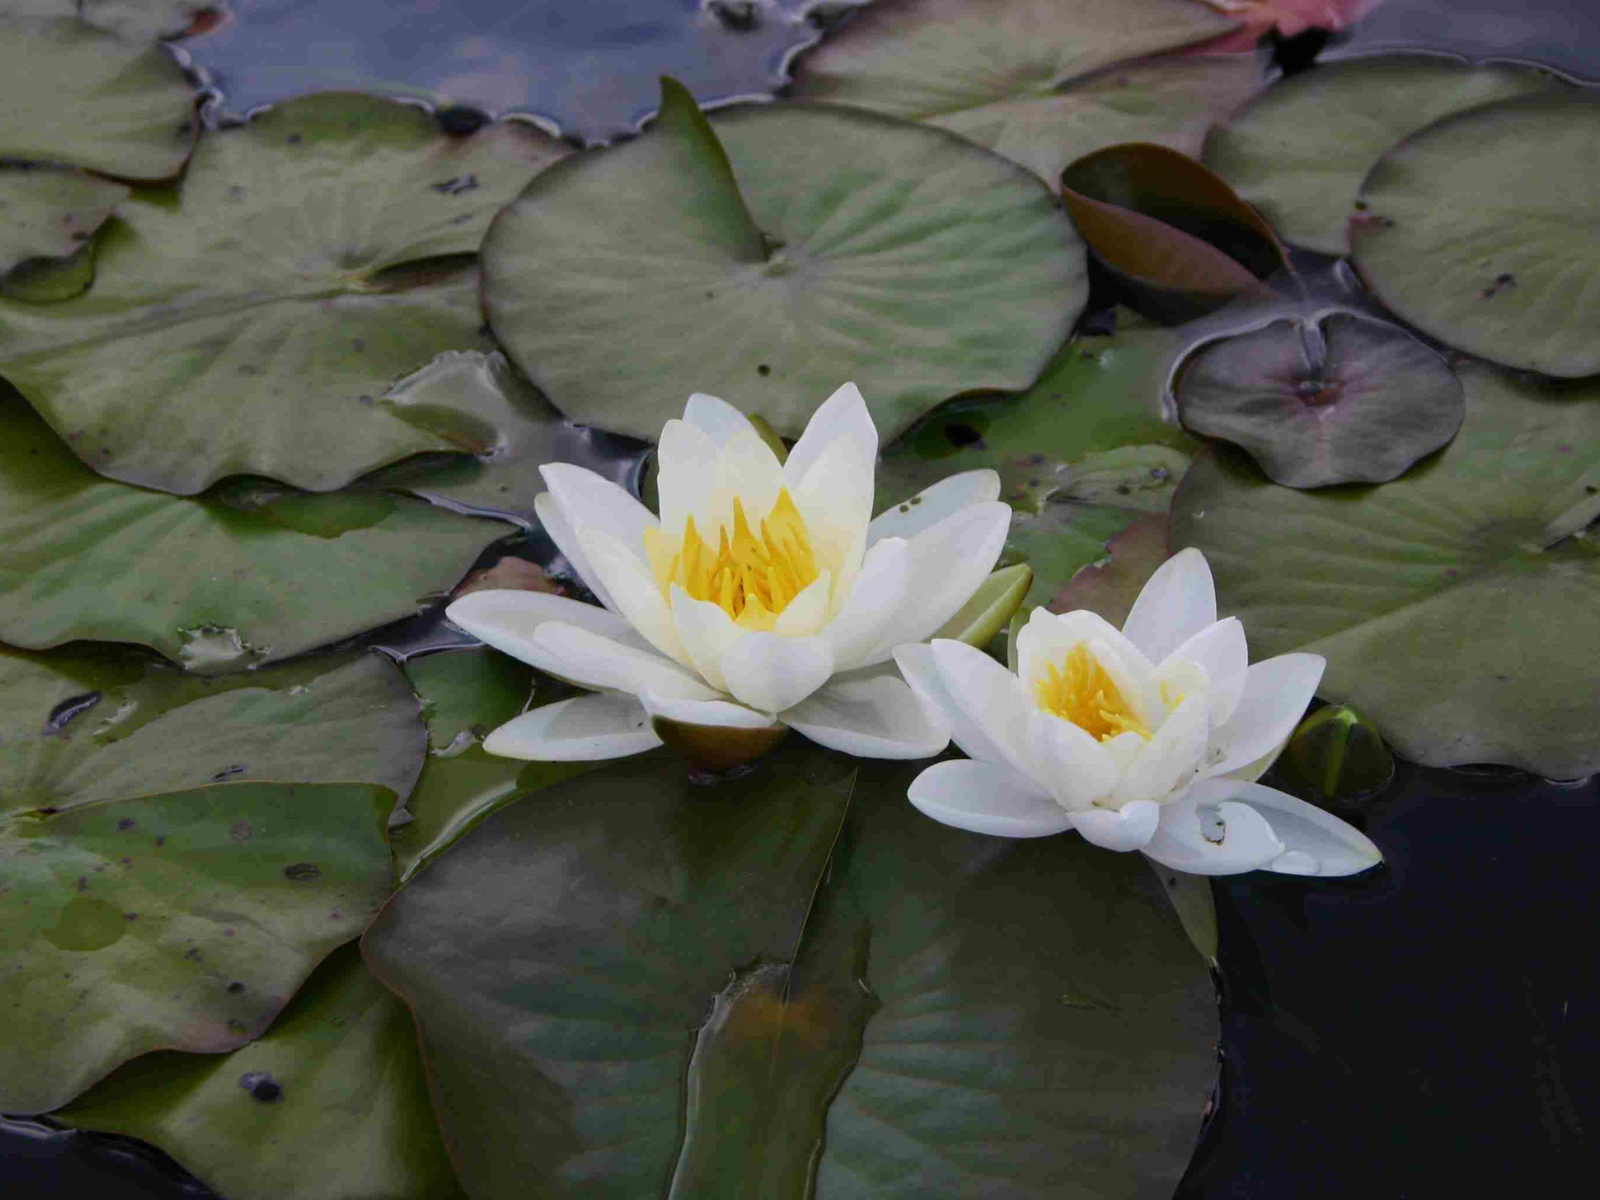 Two white water lily flowers among a cluster of green lily pads on the water's surface.